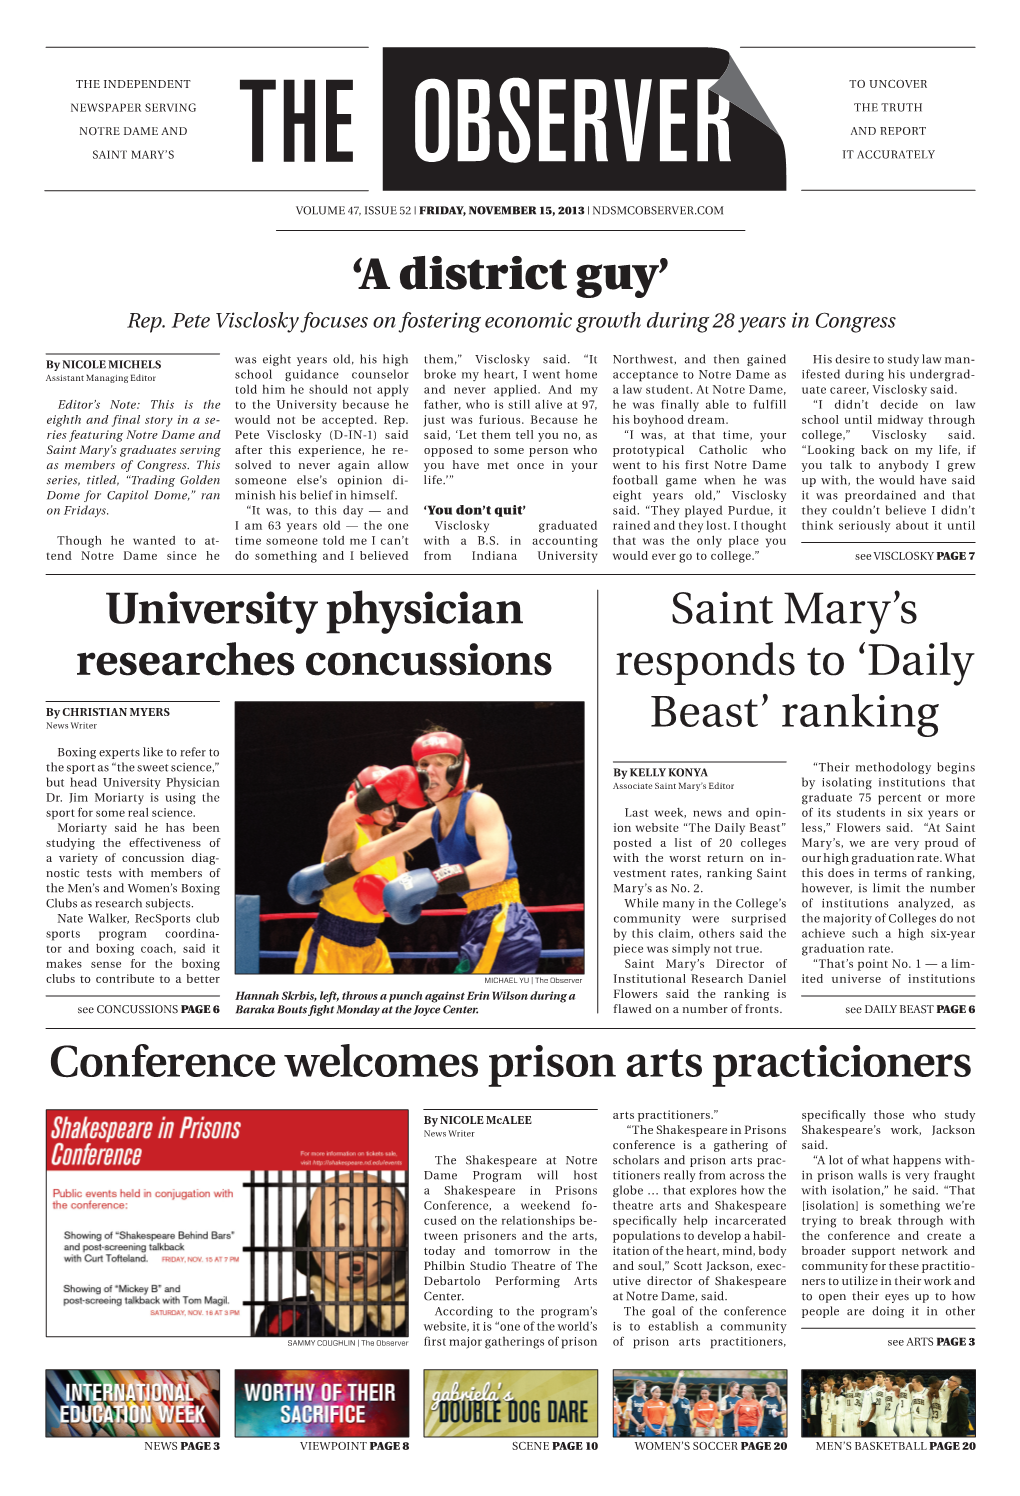 University Physician Researches Concussions Saint Mary's Responds To